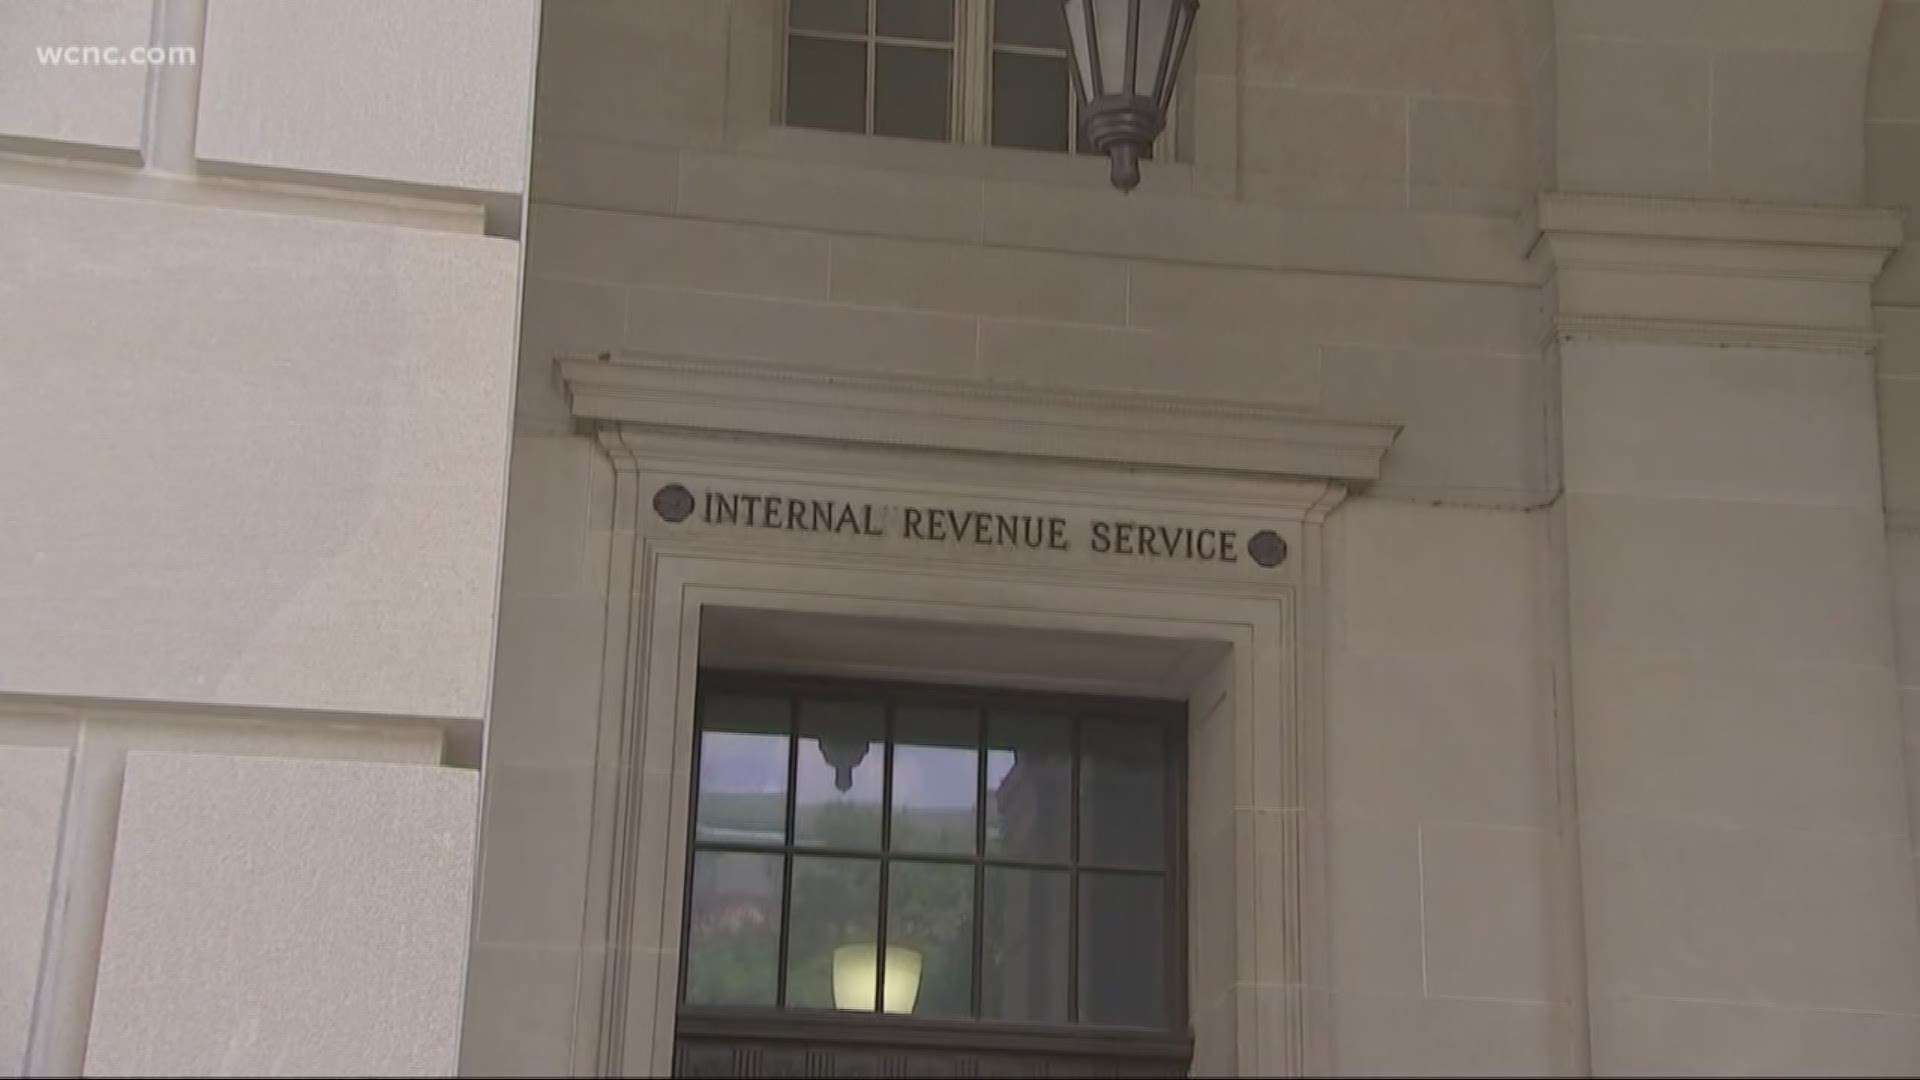 Concerns are growing about a delay in tax returns because workers who process them haven't been working due to the government shutdown.